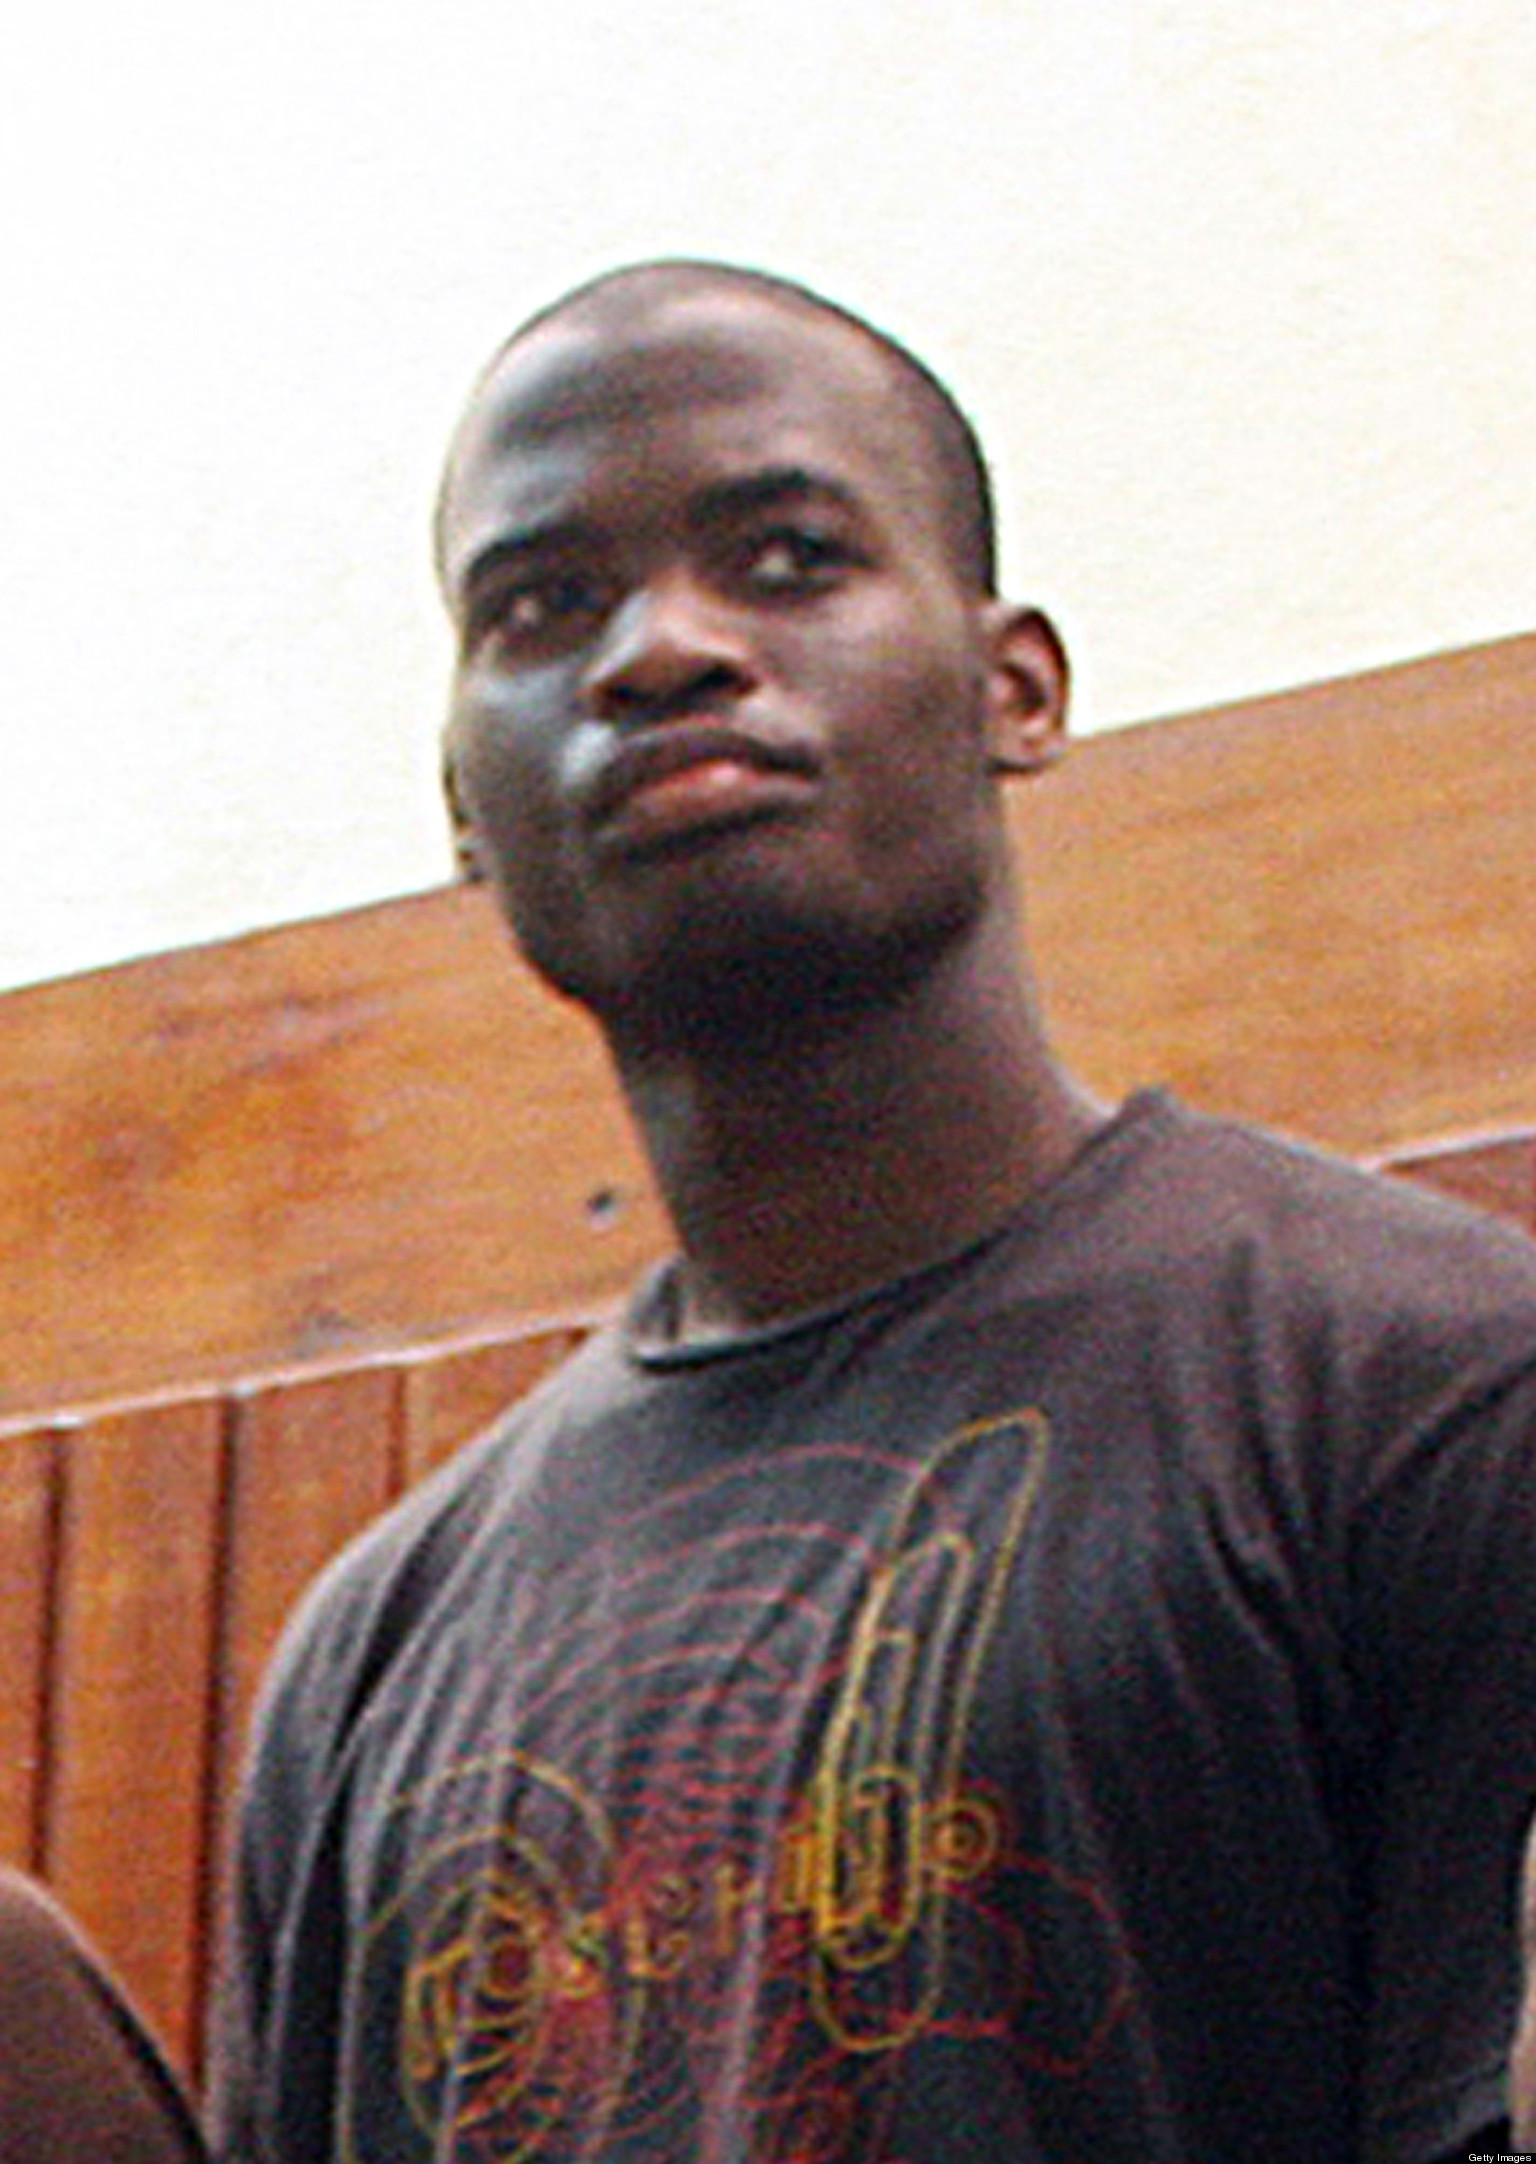 Michael Adebolajo Five Prison Staff Suspended After Lee